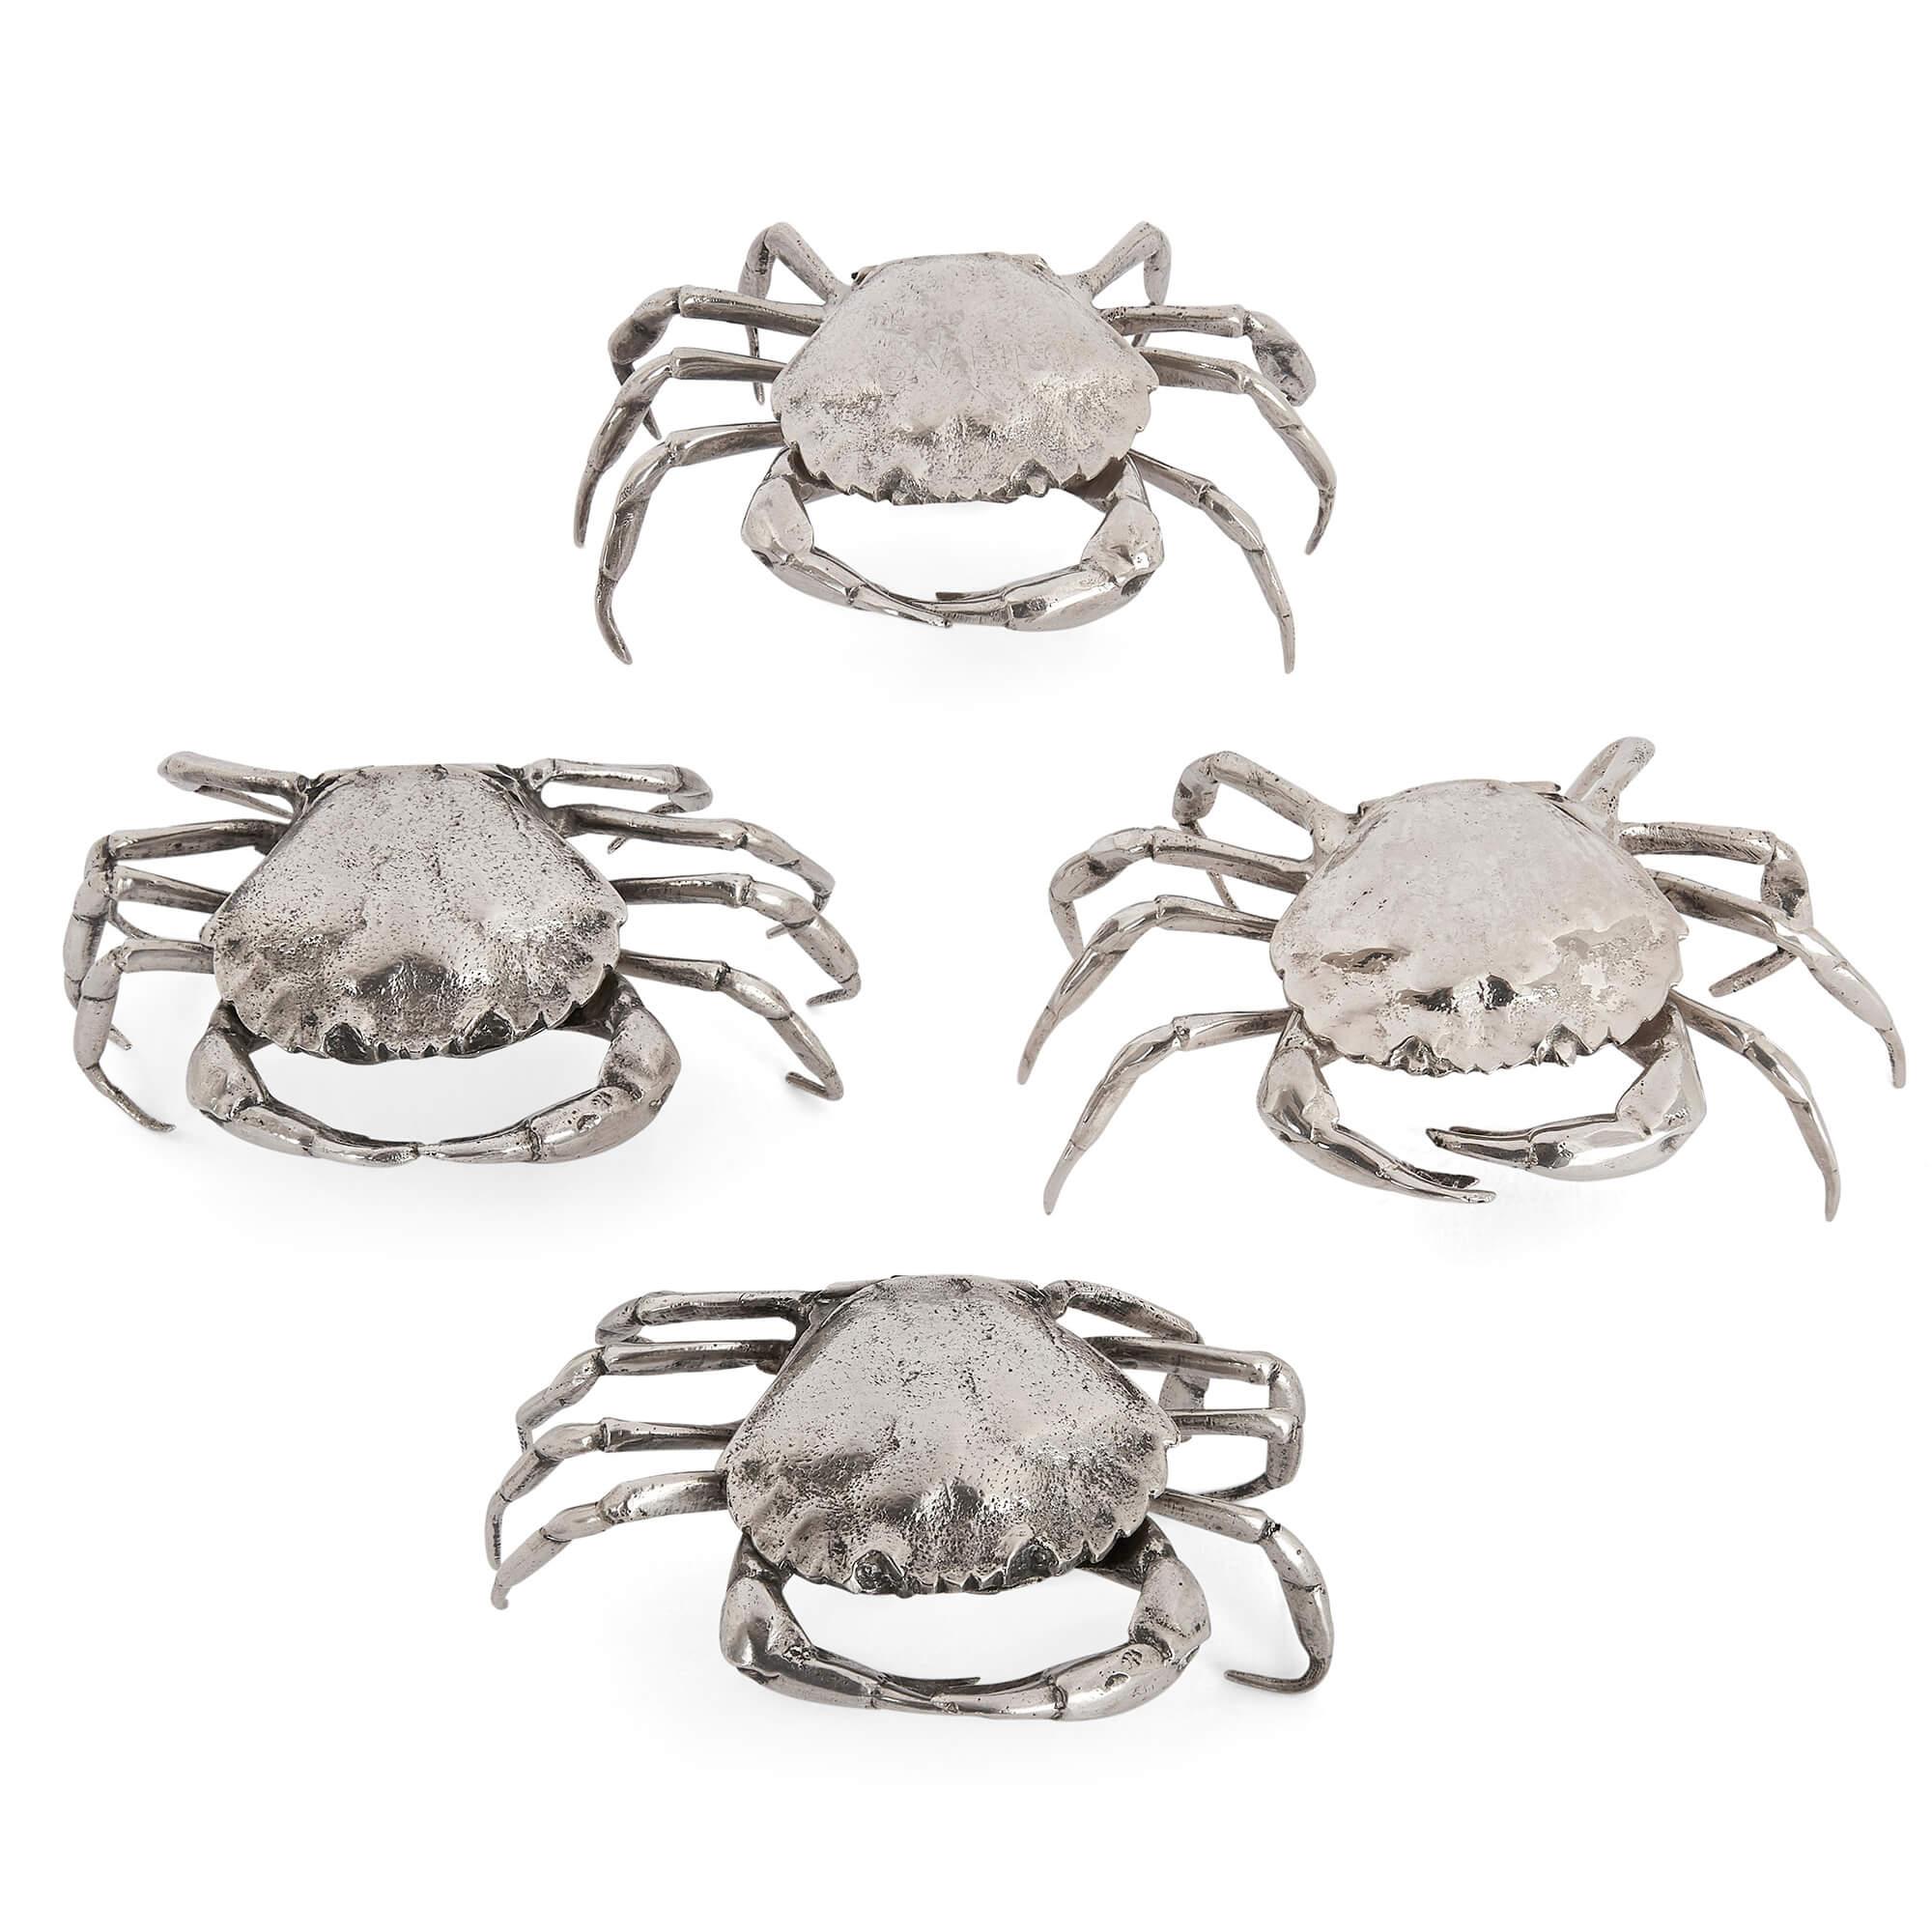 Set of unusual Spanish crab boxes in solid silver
Spanish, 20th Century
Height 4cm, width 9cm, depth 7cm

The delightful boxes in this set of four are crafted from silver in the distinctive form of crabs. Each box is naturalistically modelled as